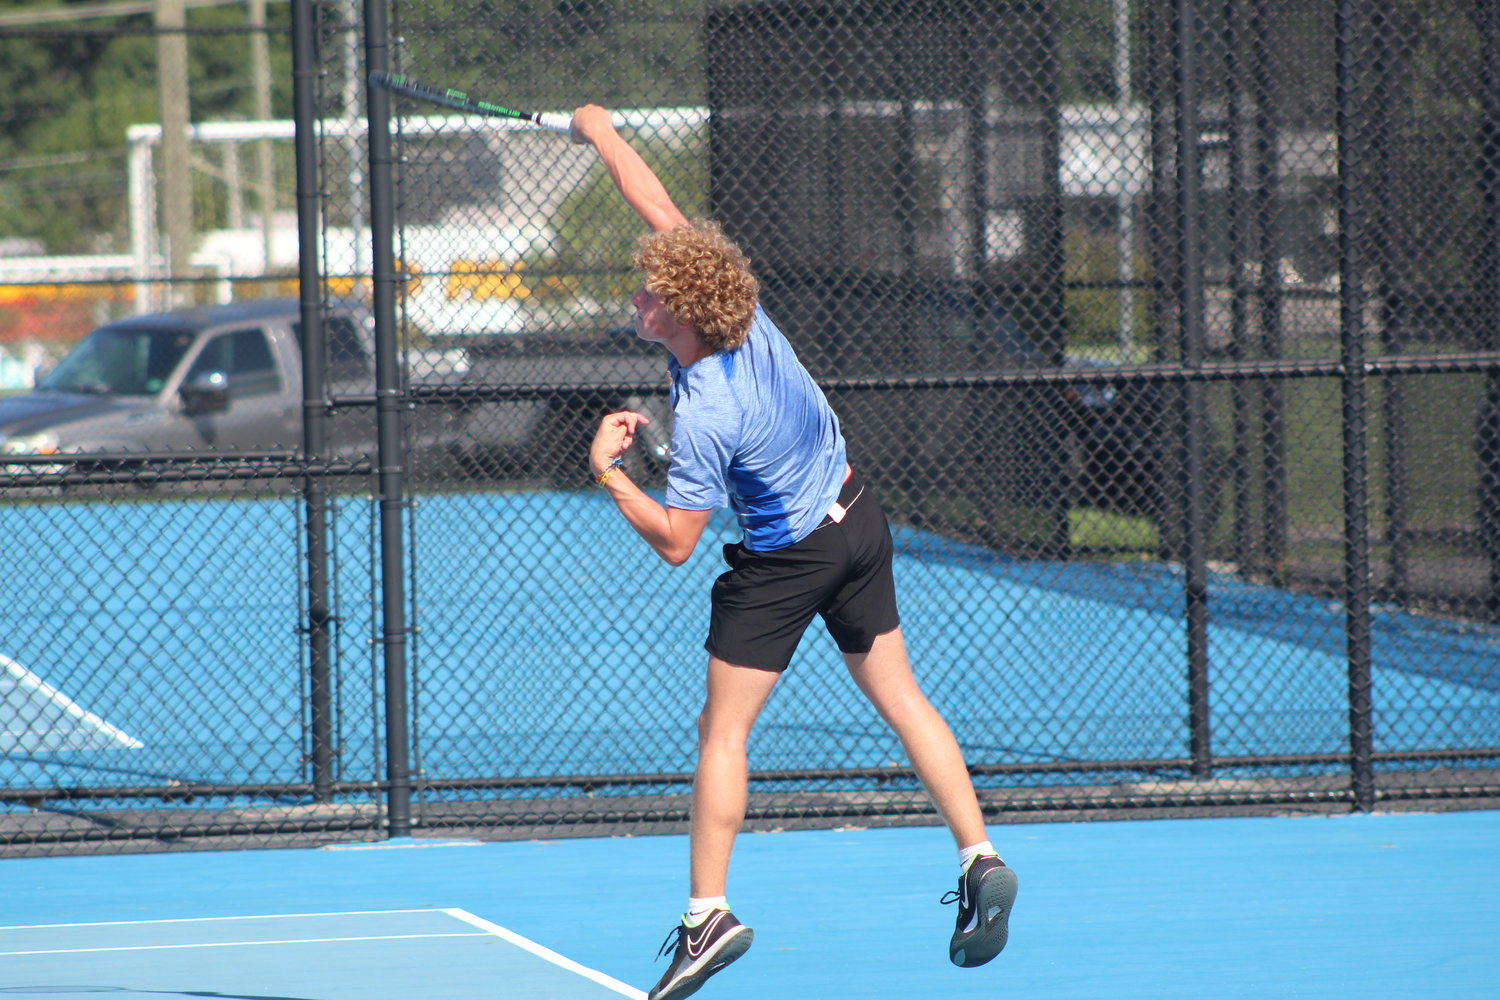 Wyatt Motz picked up the other win at two singles for Crawfordsville.